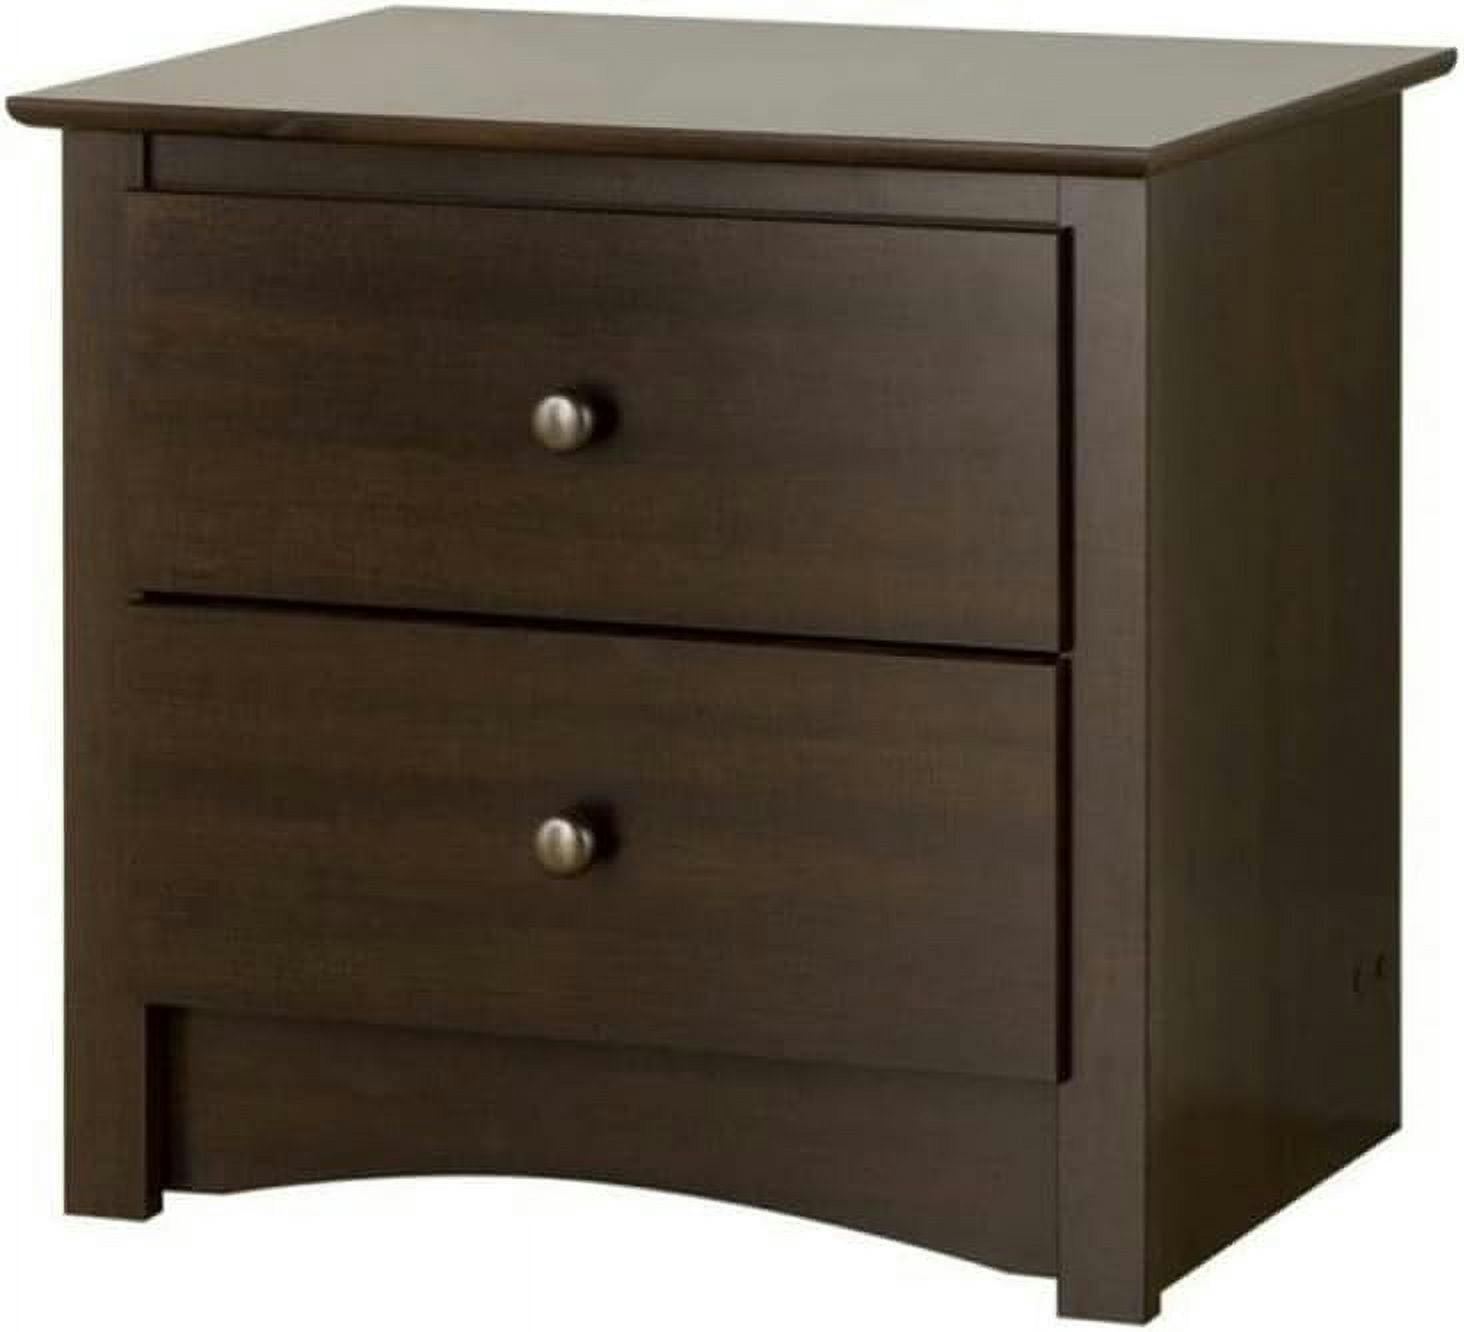 Espresso Finish Contemporary 2-Drawer Nightstand with Bronze Accents